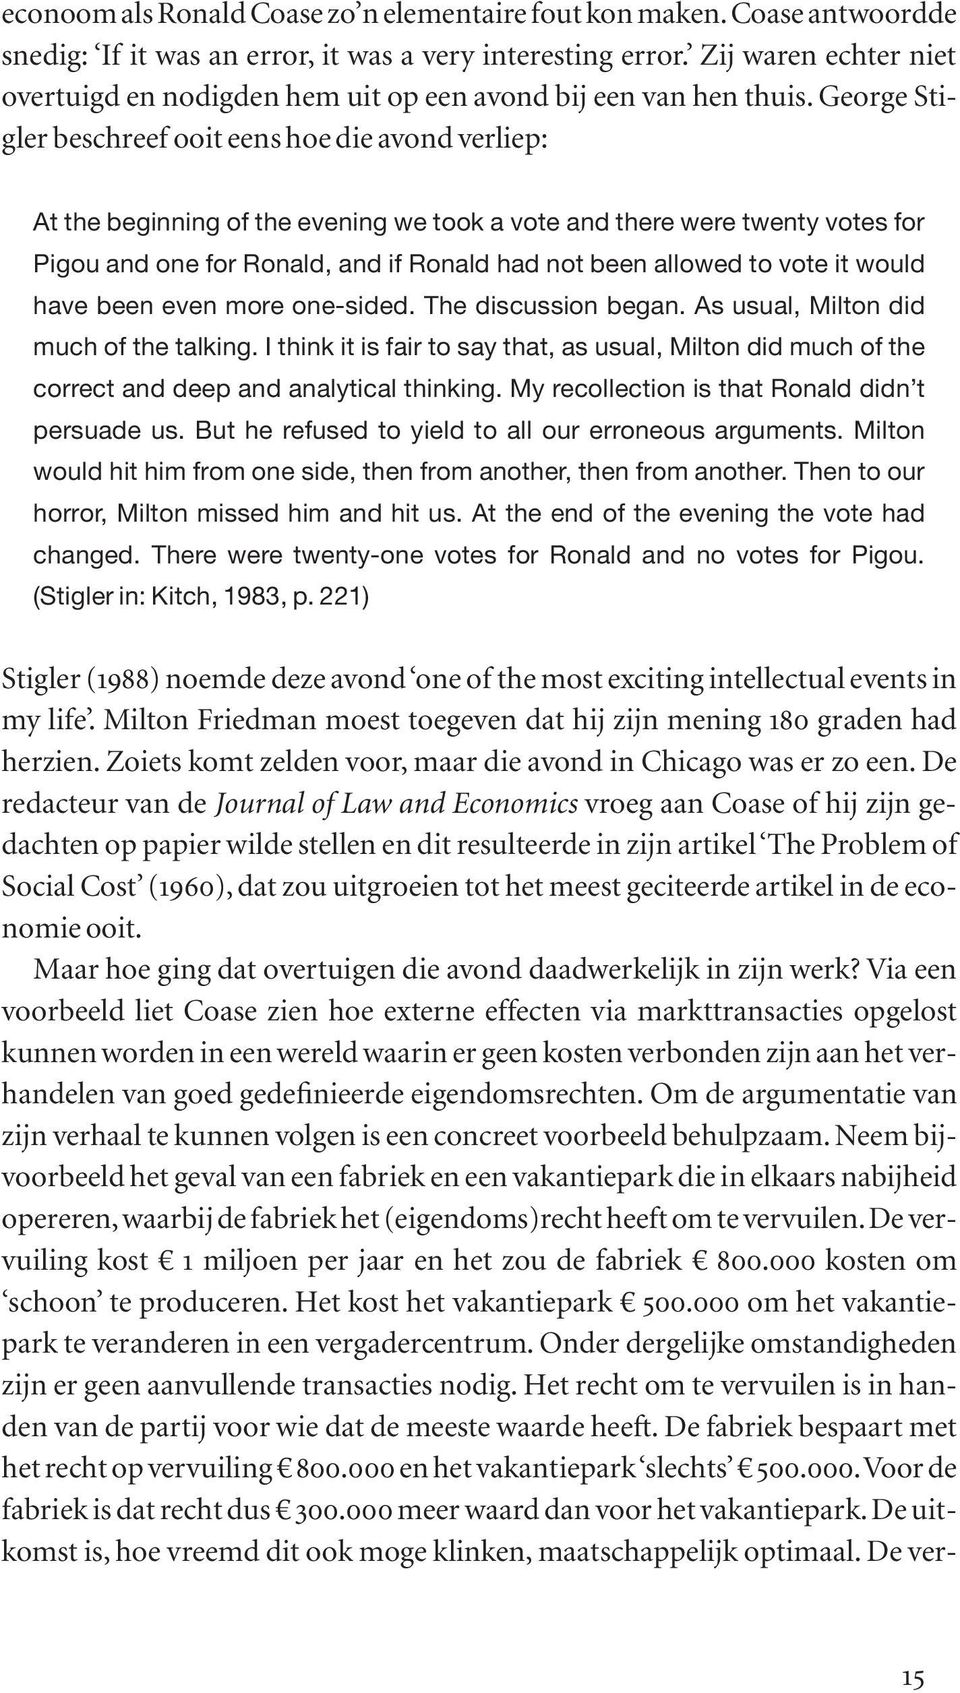 George Stigler beschreef ooit eens hoe die avond verliep: At the beginning of the evening we took a vote and there were twenty votes for Pigou and one for Ronald, and if Ronald had not been allowed